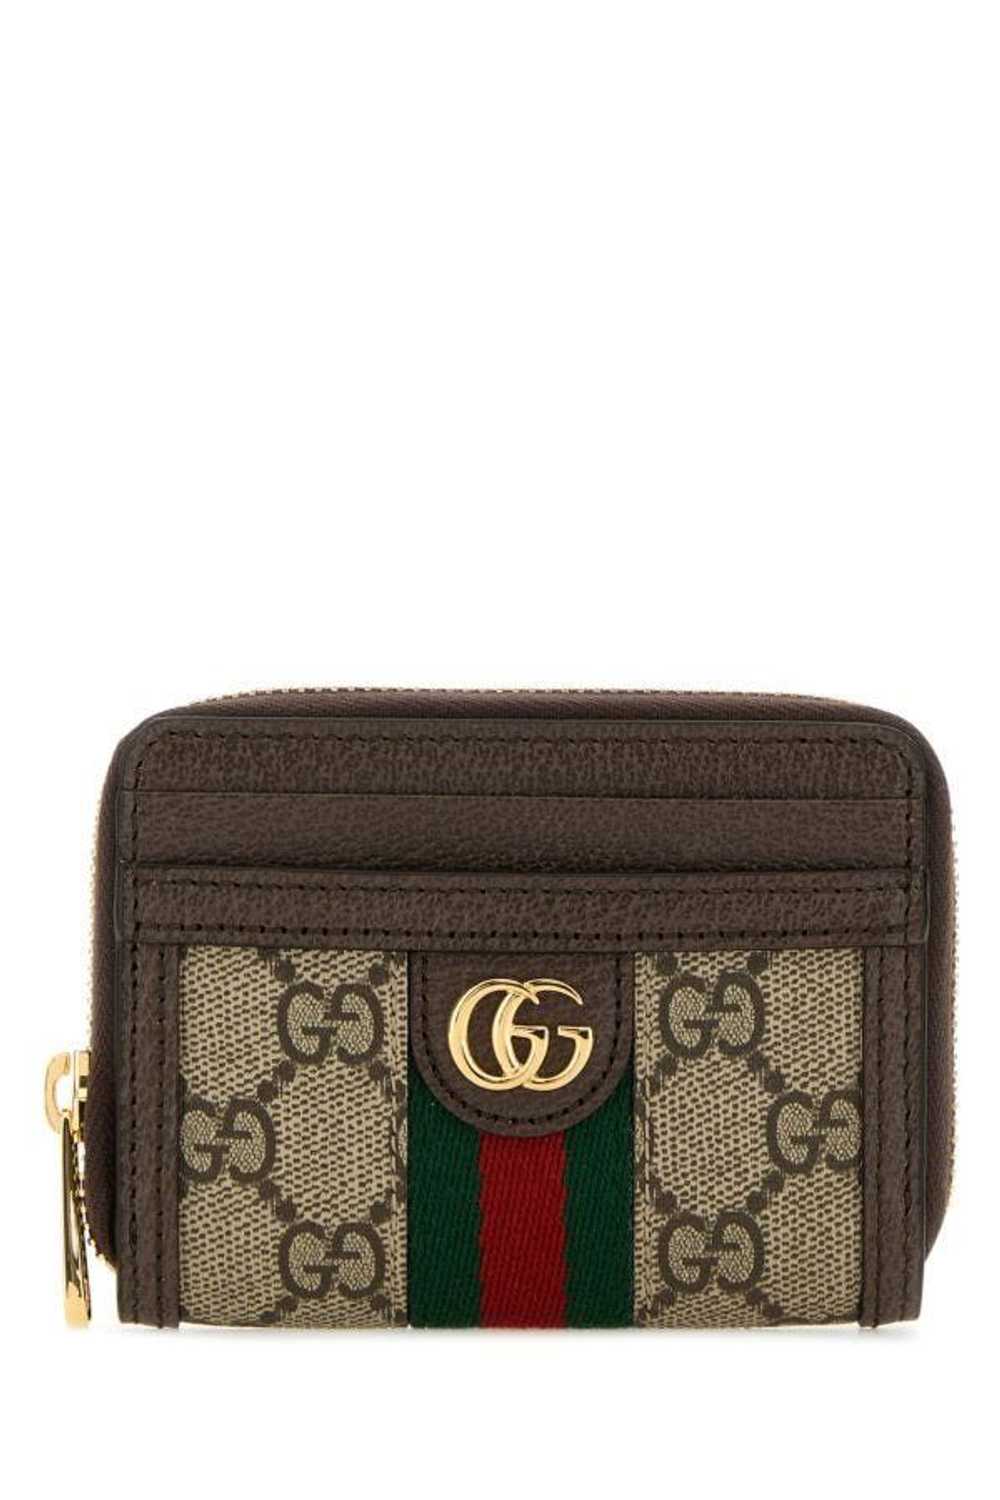 Gucci Gg Supreme Fabric Ophidia Wallet - image 3